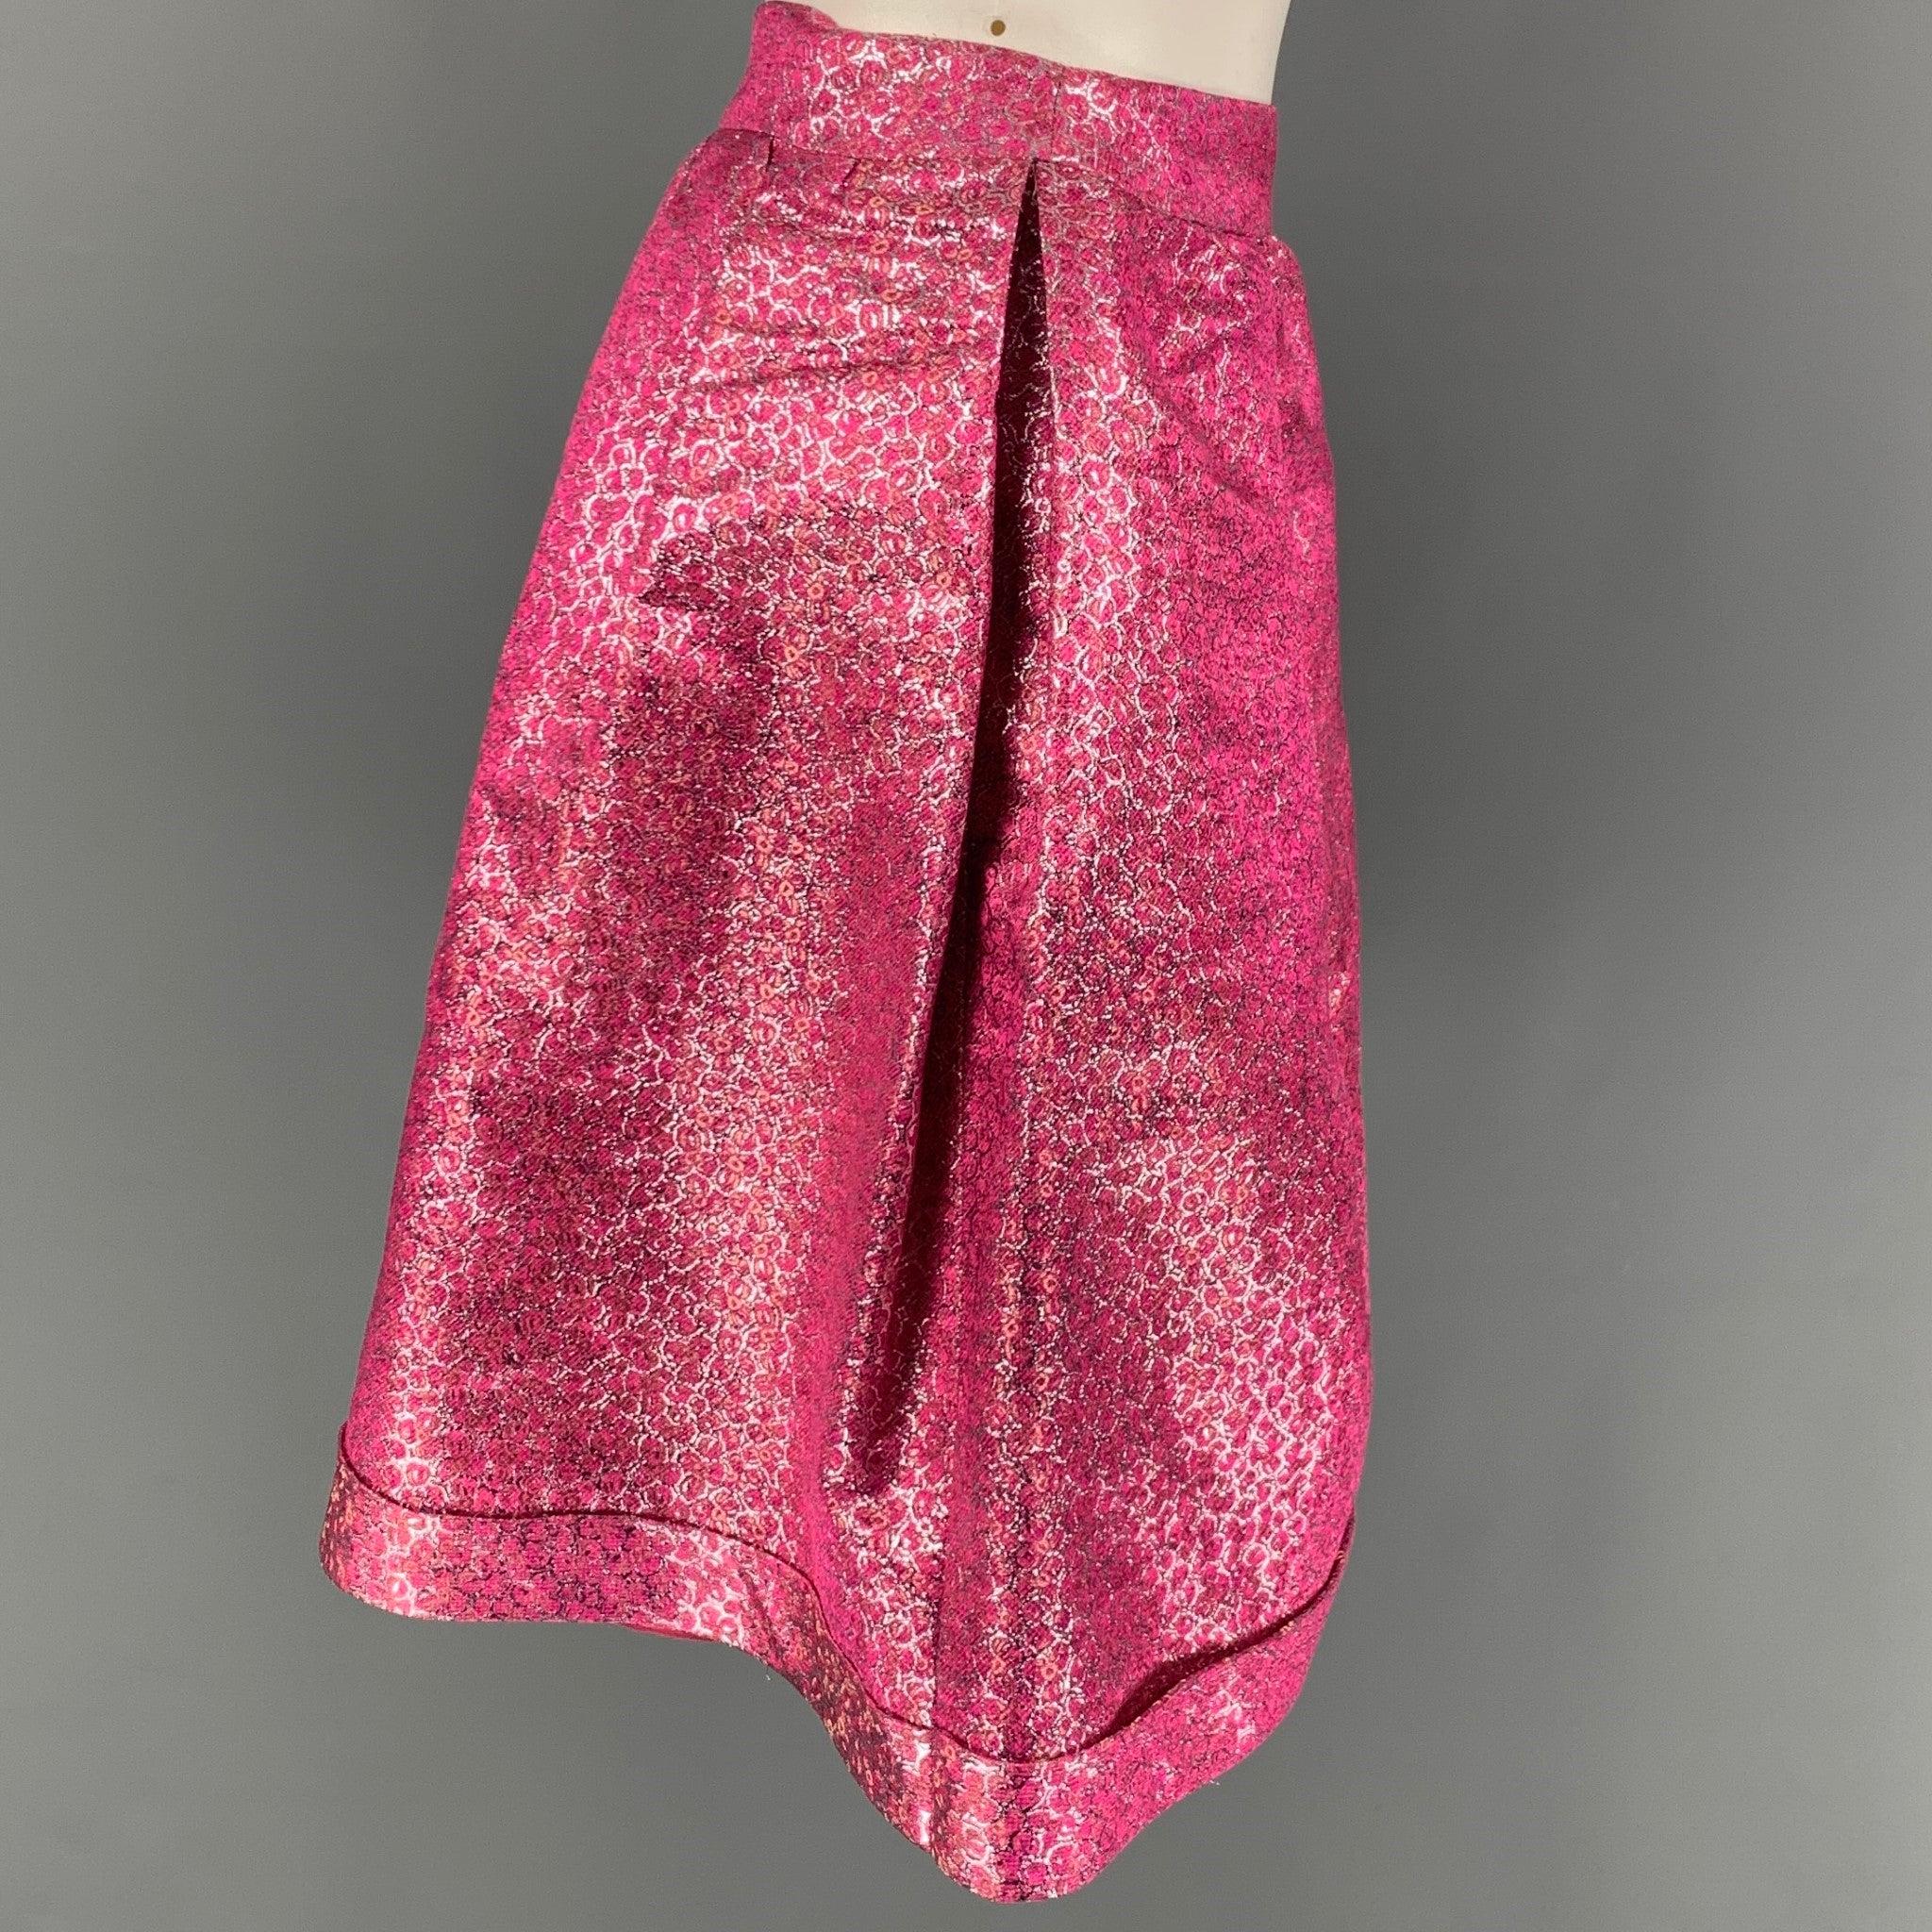 BURBERRY PRORSUM skirt comes in a pink metallic polyester / silk with a slip liner featuring a pleated style and a side zipper closure. Made in Italy.
Very Good
Pre-Owned Condition. 

Marked:   40 

Measurements: 
  Waist:
23.5 inches  Hip: 41